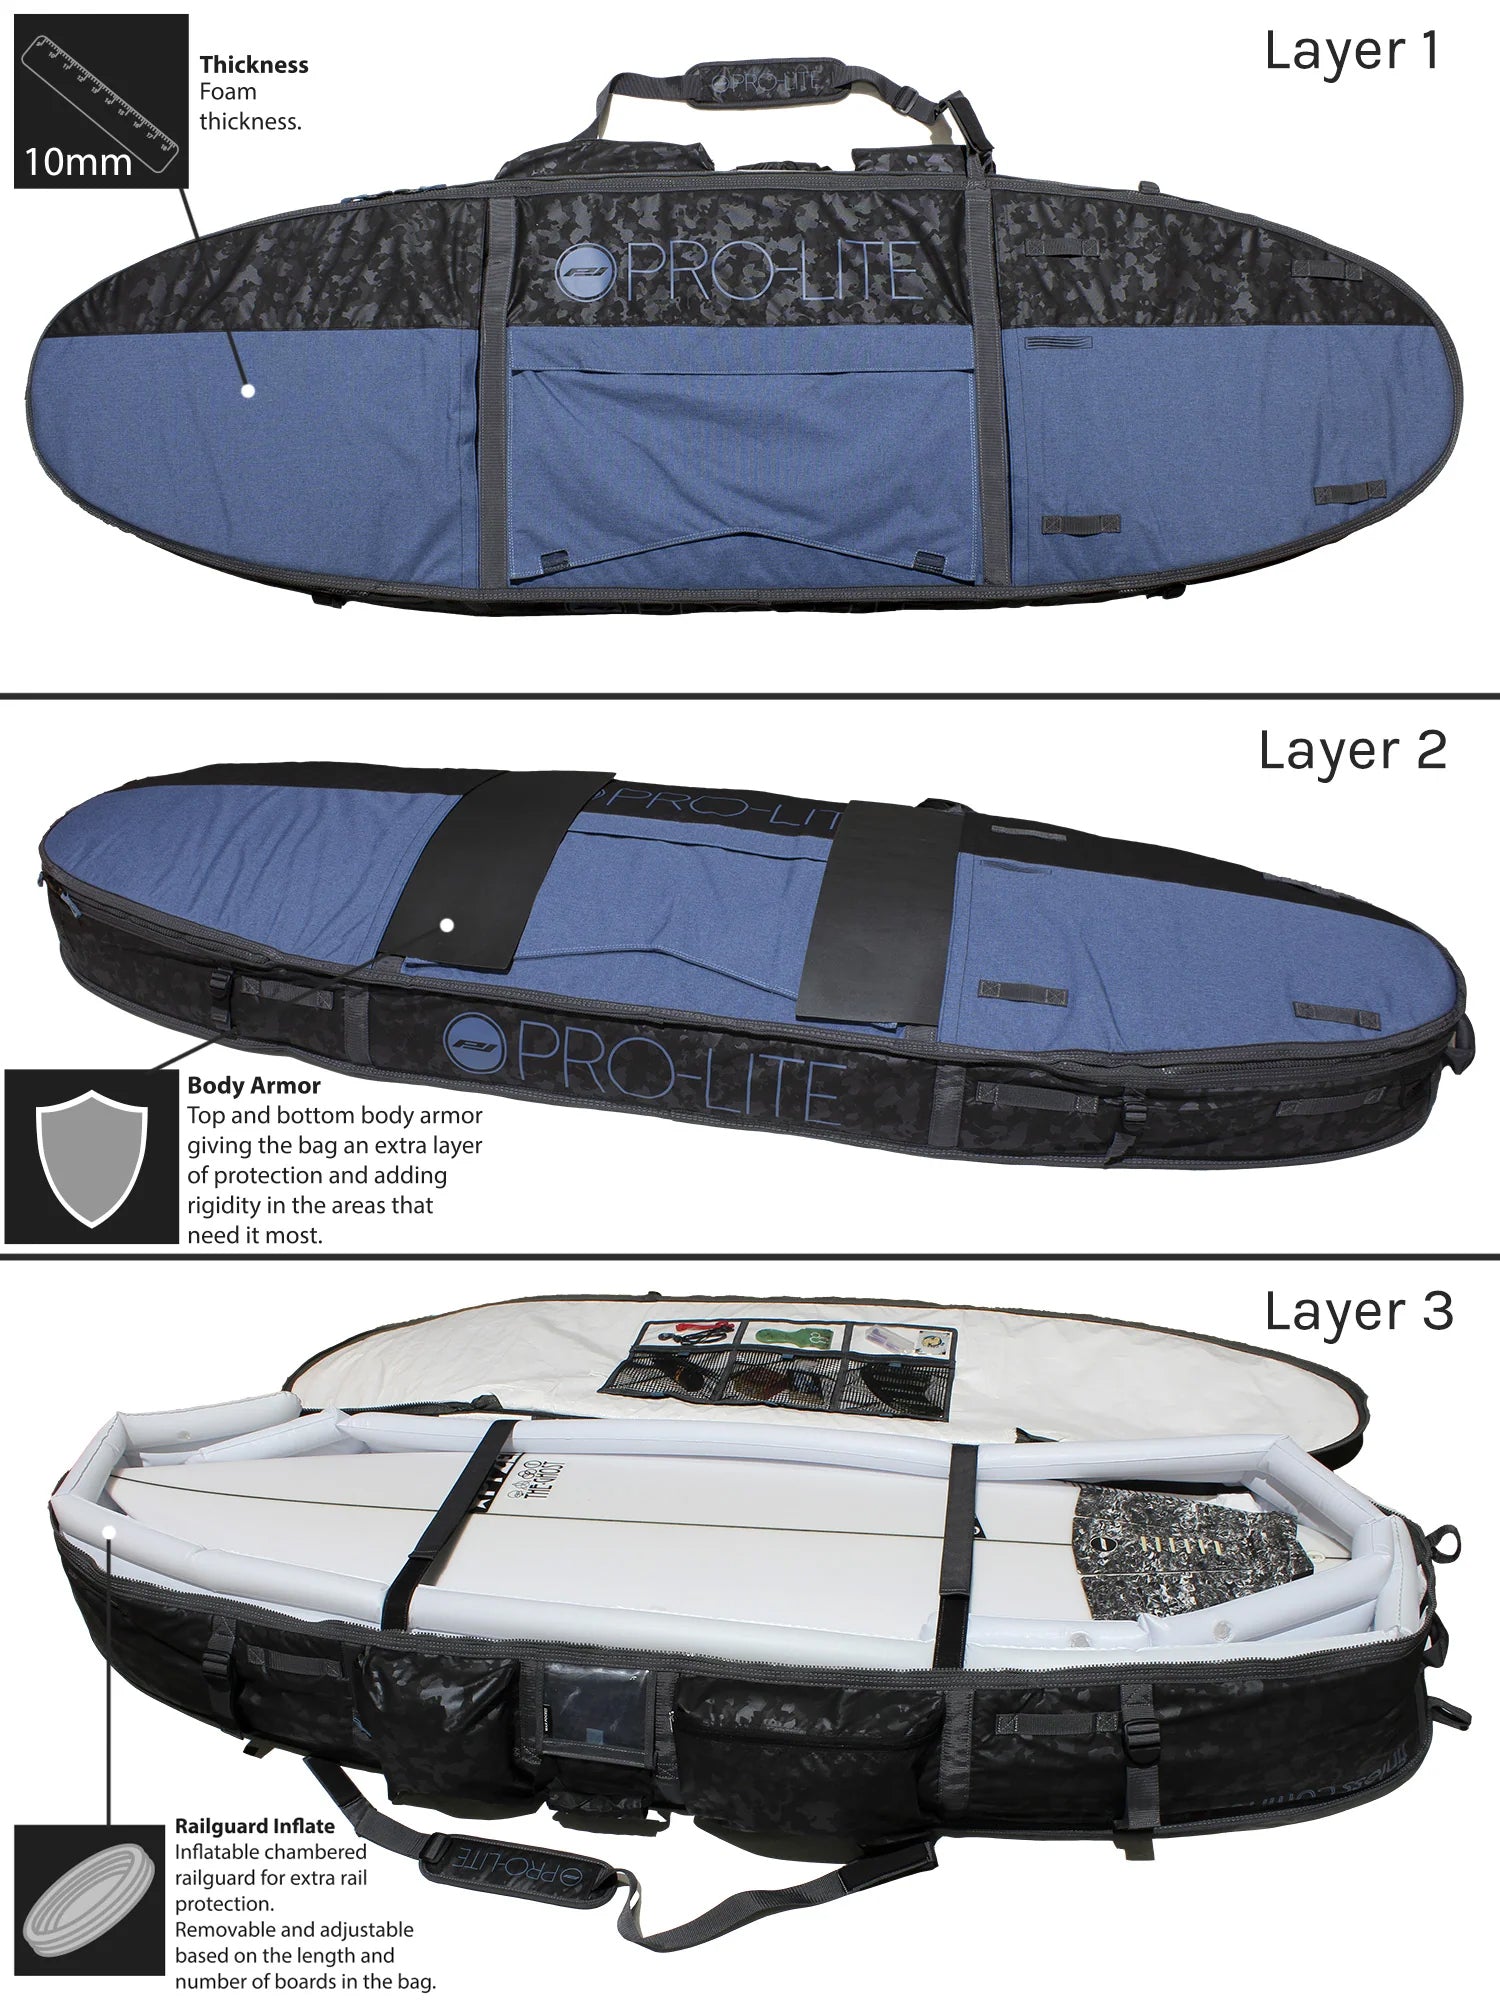 Pro-Lite Armored Coffin Double/Triple Travel Surfboard Bag Infographic